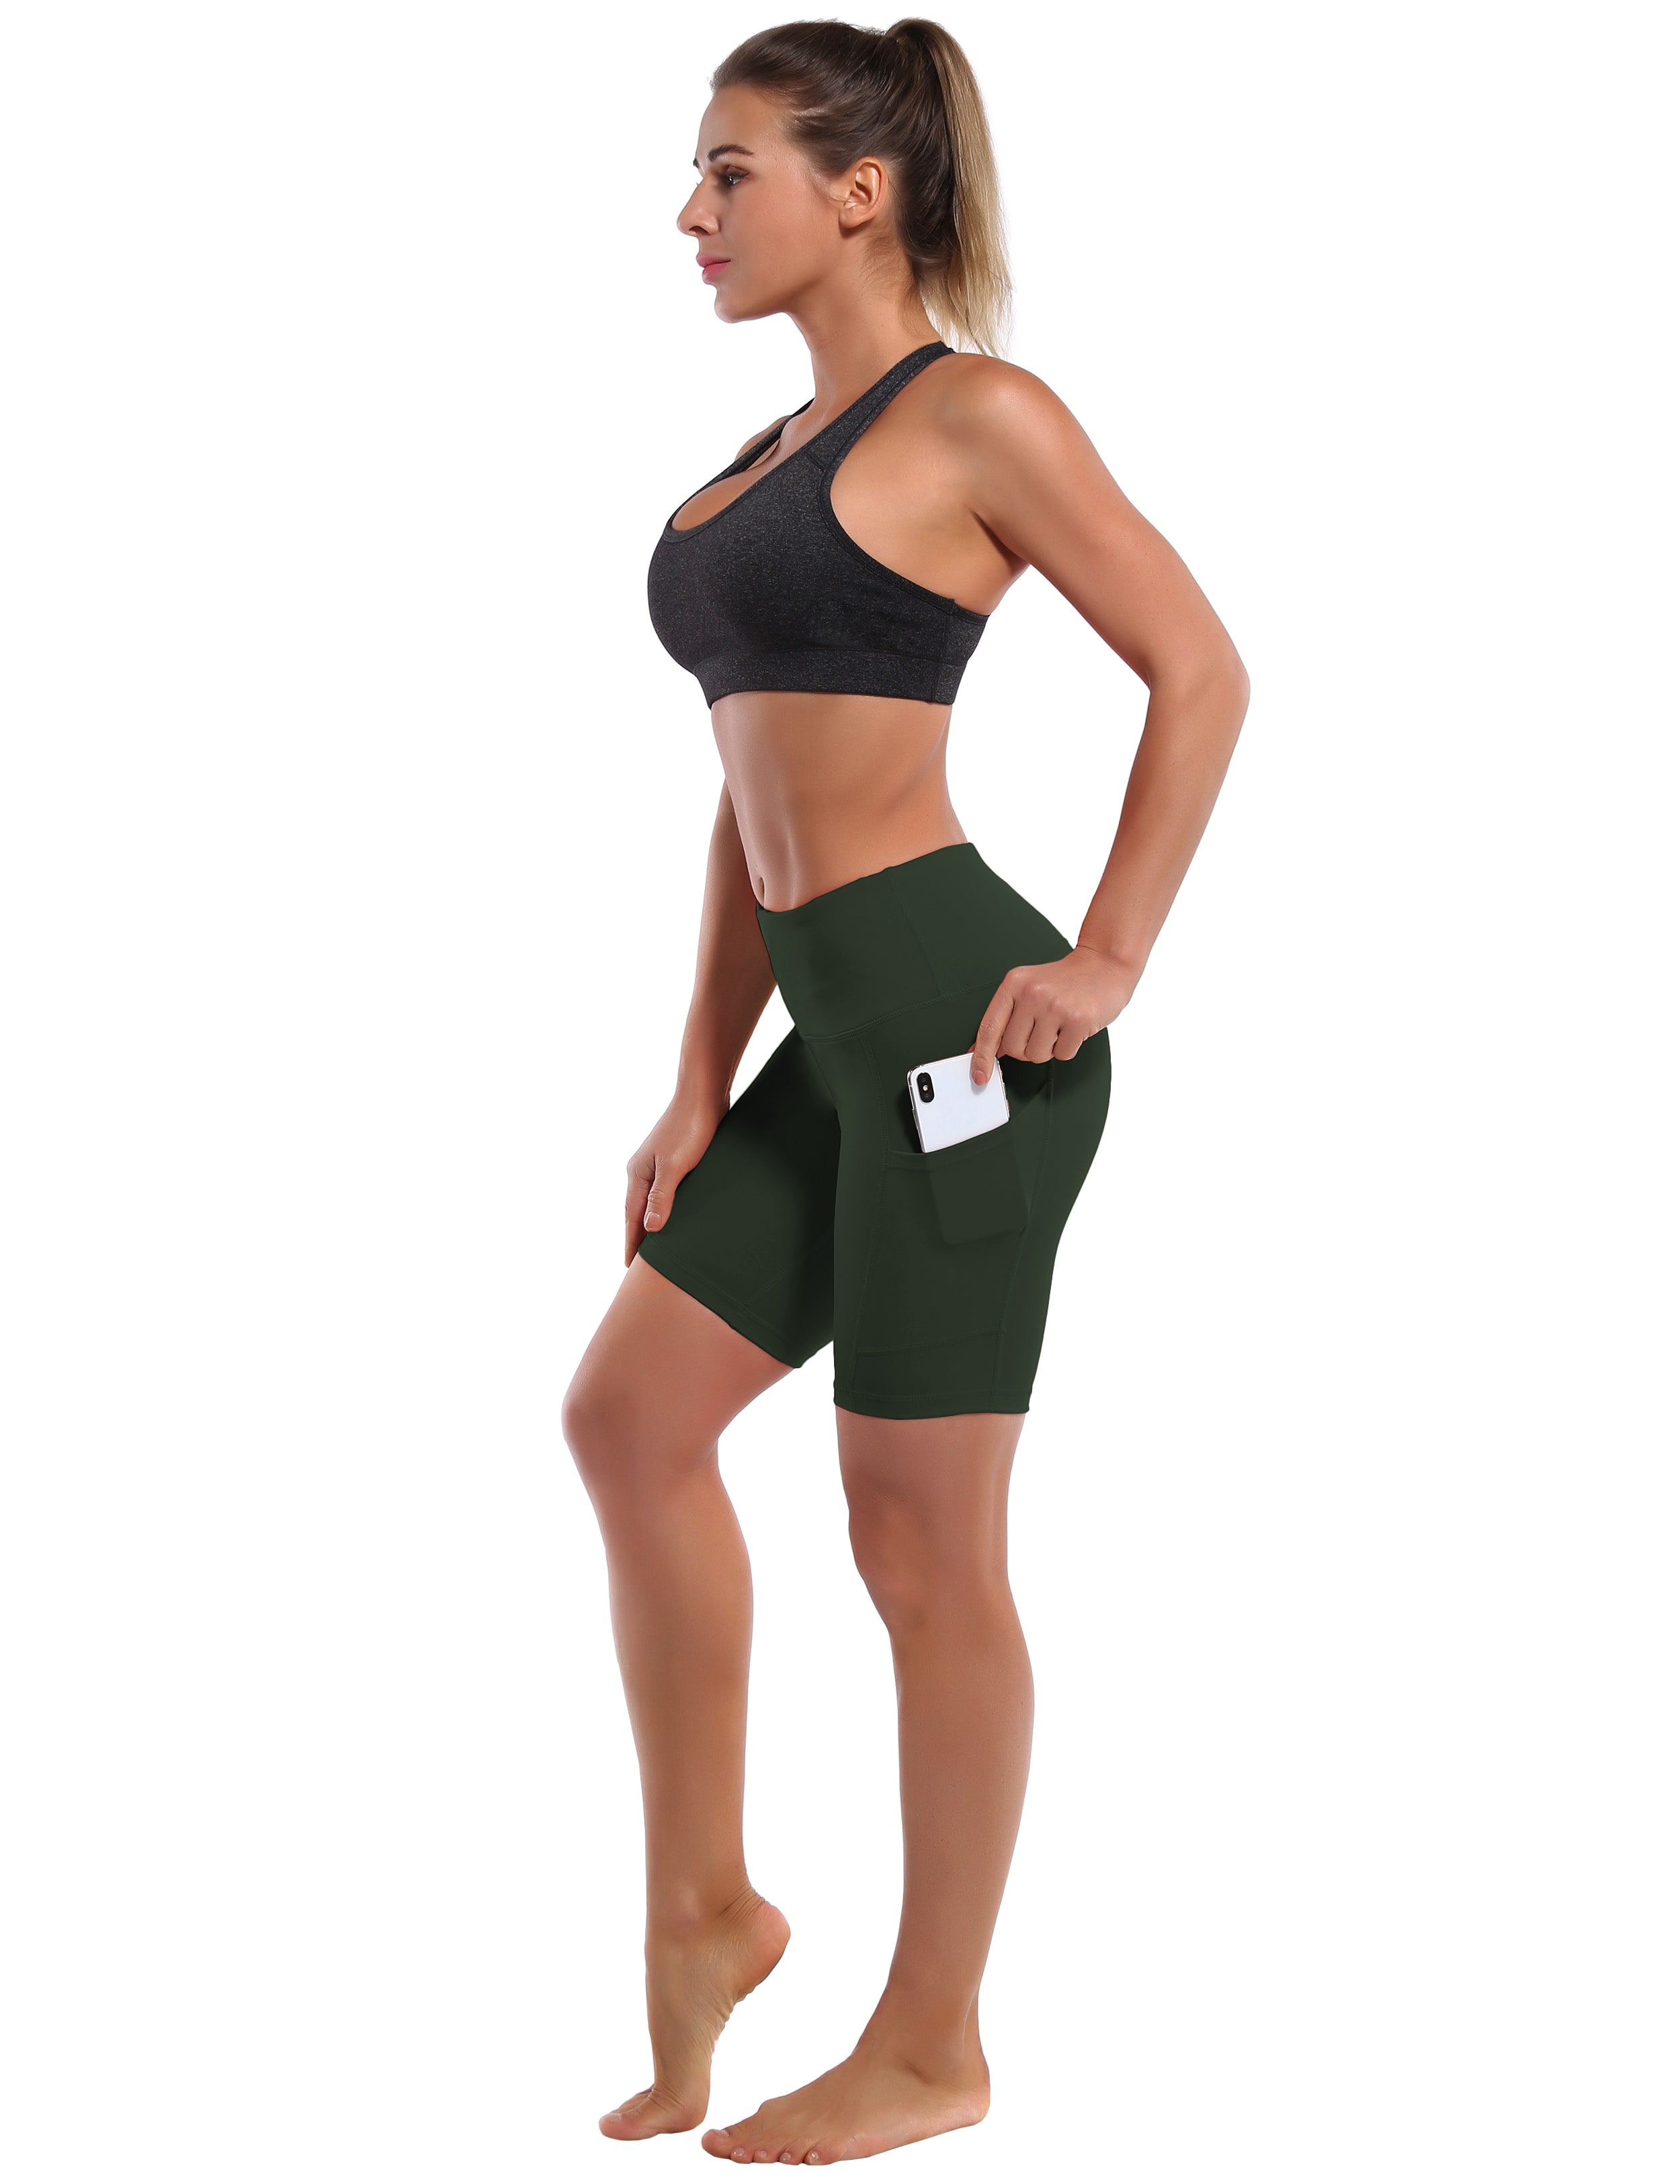 8" Side Pockets Pilates Shorts olivegray Sleek, soft, smooth and totally comfortable: our newest style is here. Softest-ever fabric High elasticity High density 4-way stretch Fabric doesn't attract lint easily No see-through Moisture-wicking Machine wash 75% Nylon, 25% Spandex